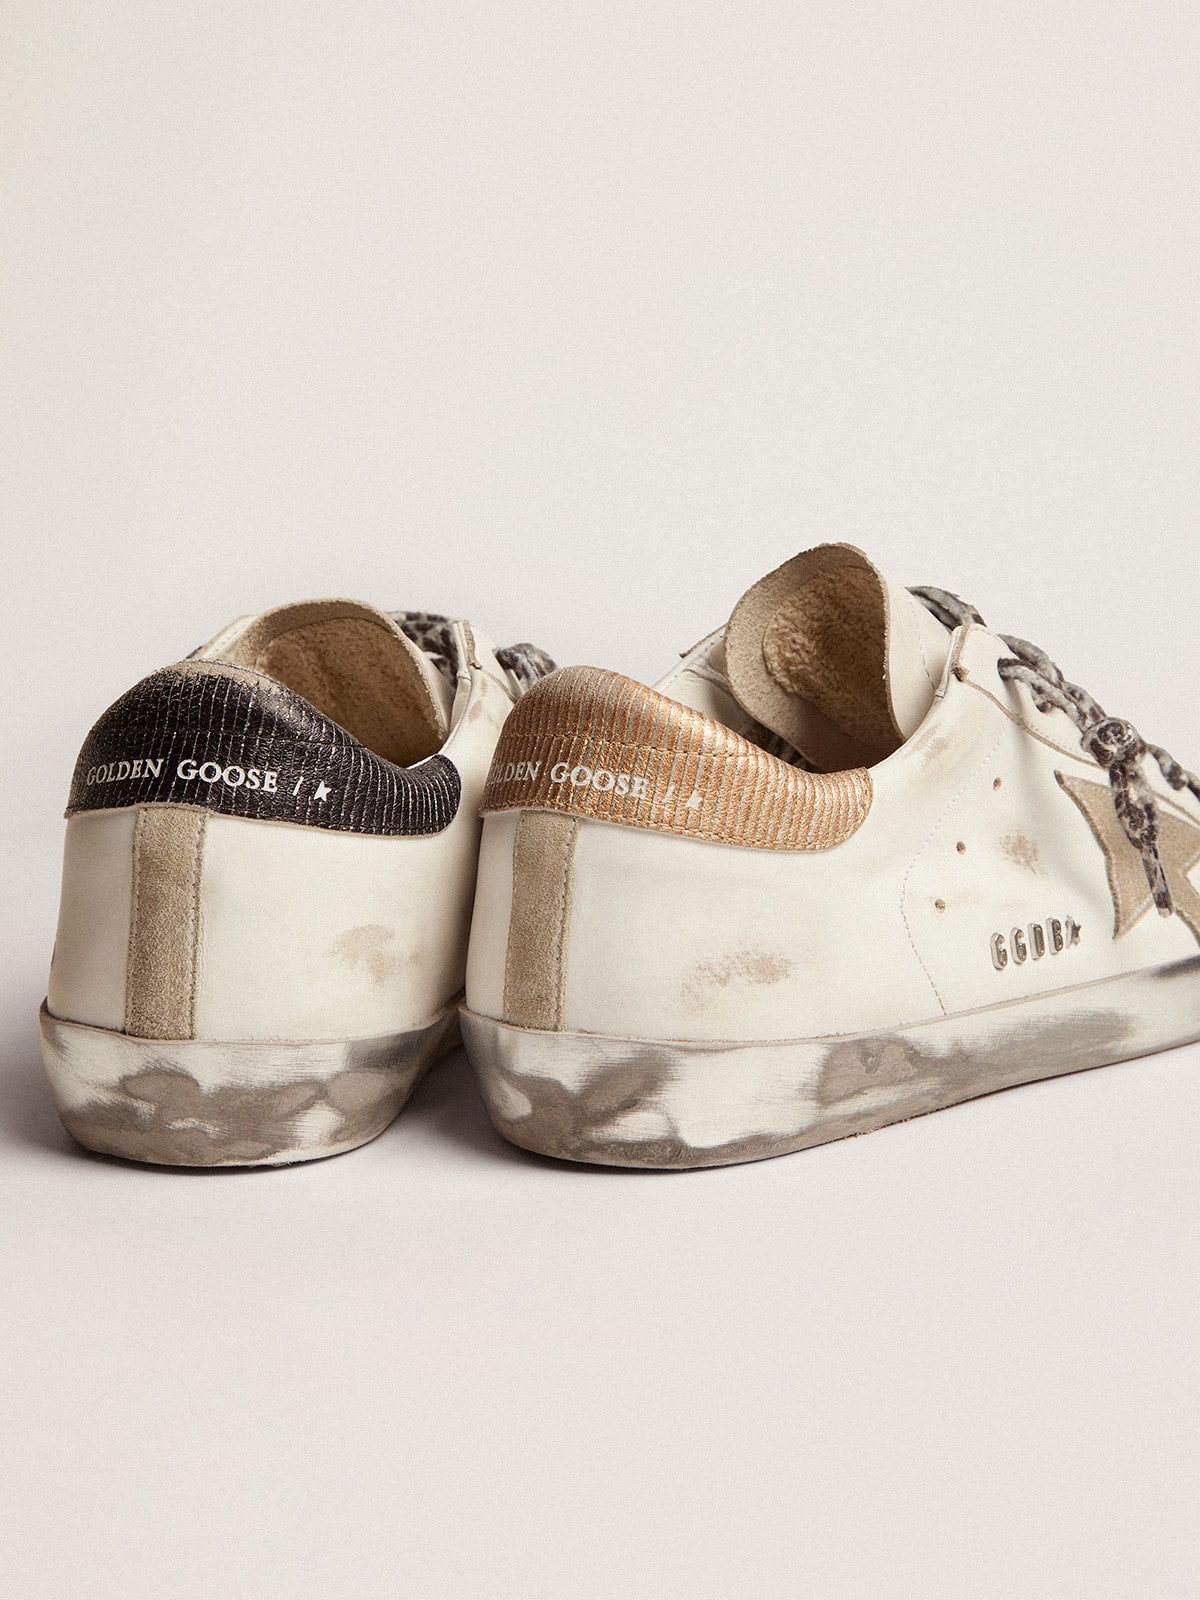 Women's Super-Star in white leather with gray suede star | Golden Goose